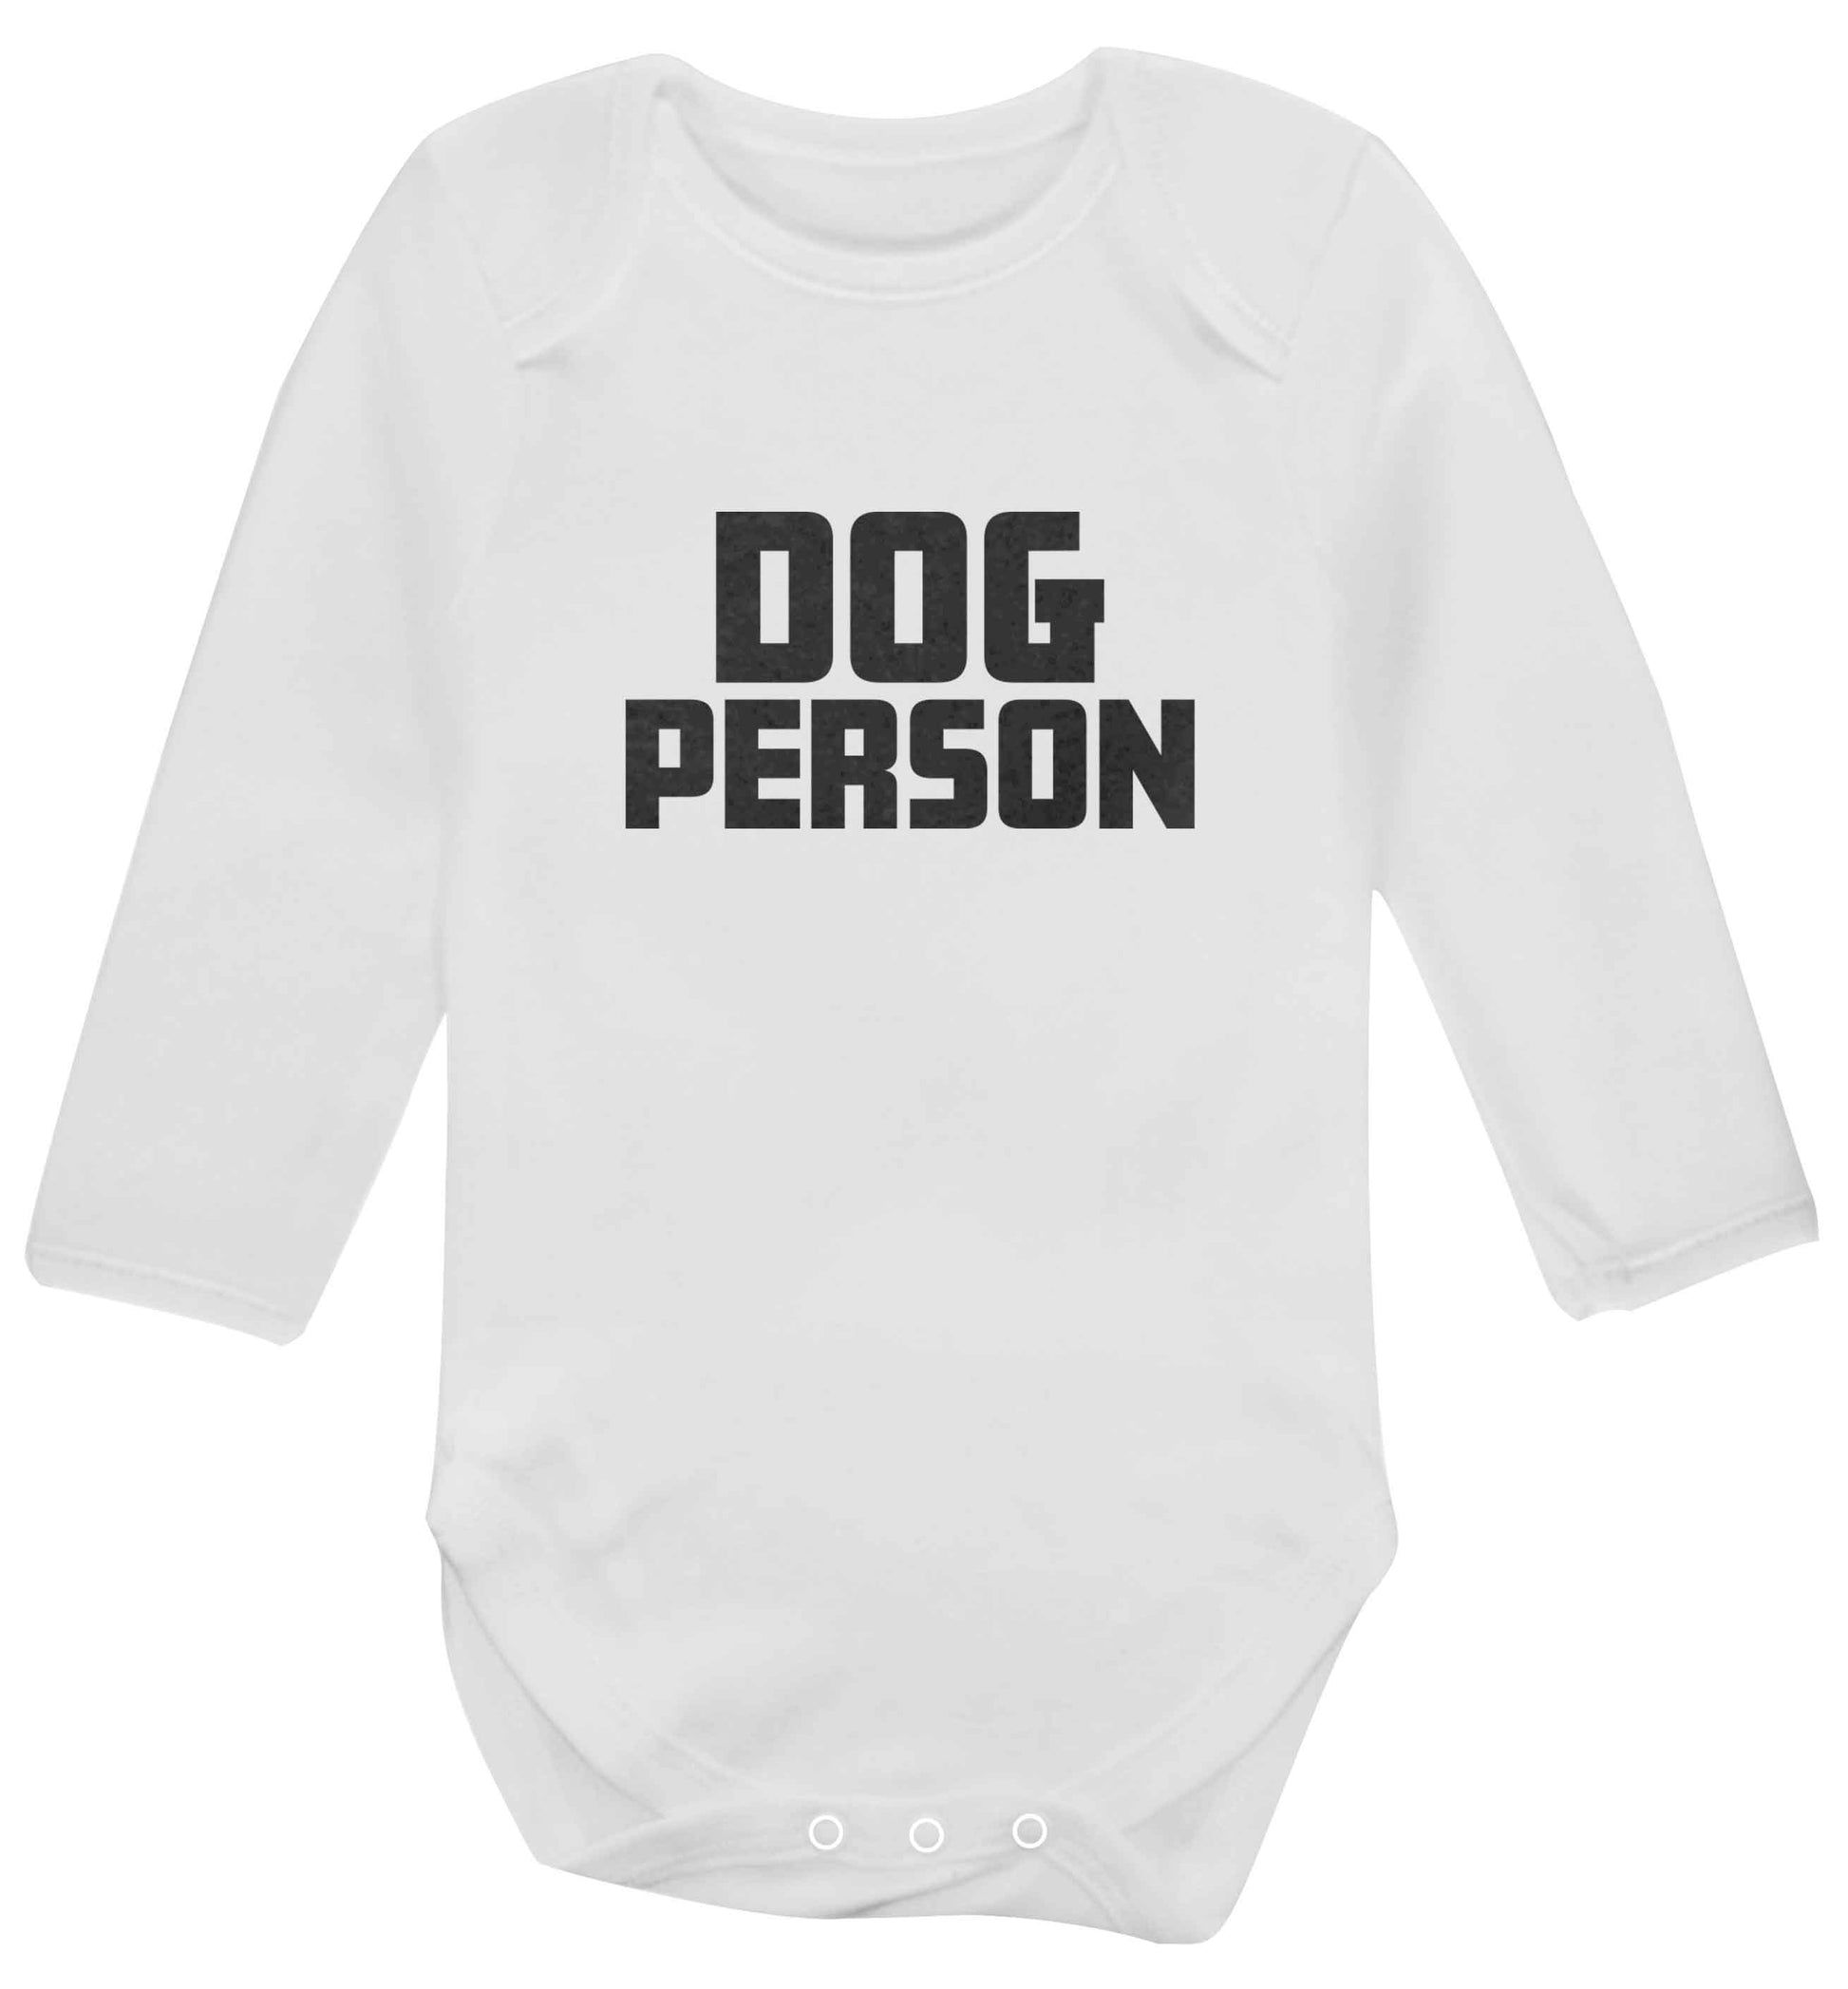 Dog Person Kit baby vest long sleeved white 6-12 months